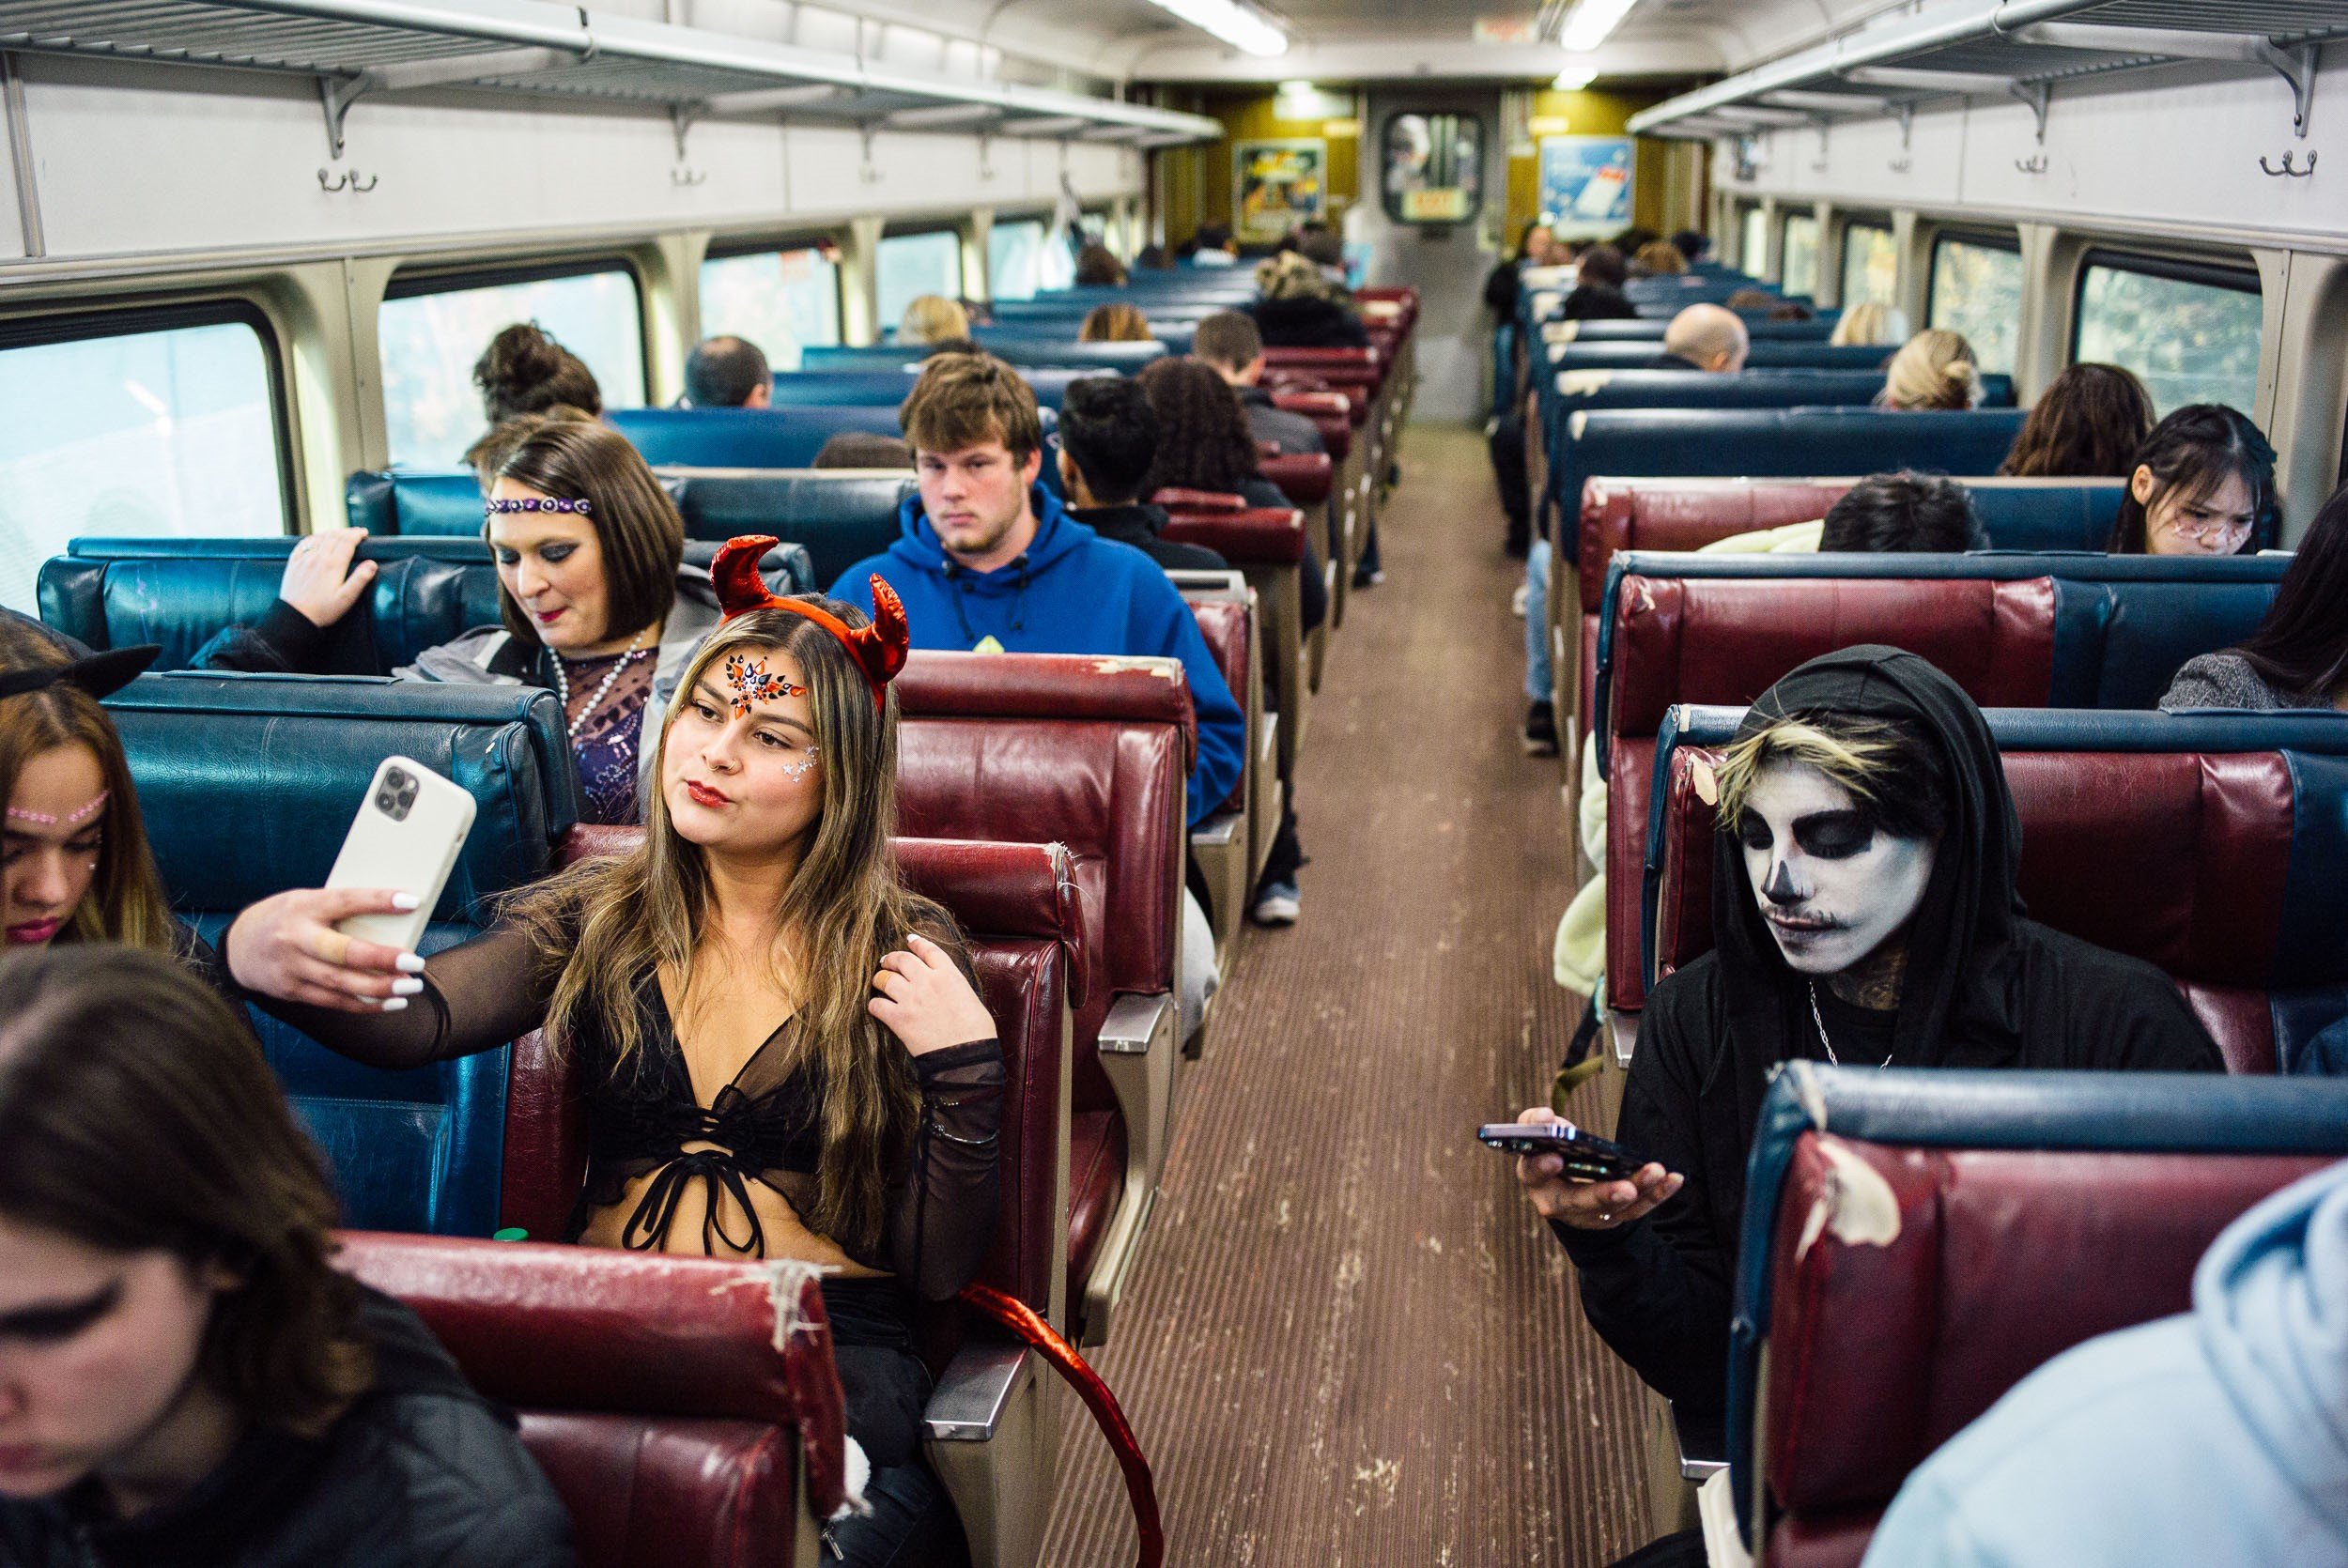 Newburyport/Rockport Line Achieves Highest Weekend Ridership and Best October On-Time Performance Ever During City of Salem’s Haunted Happenings